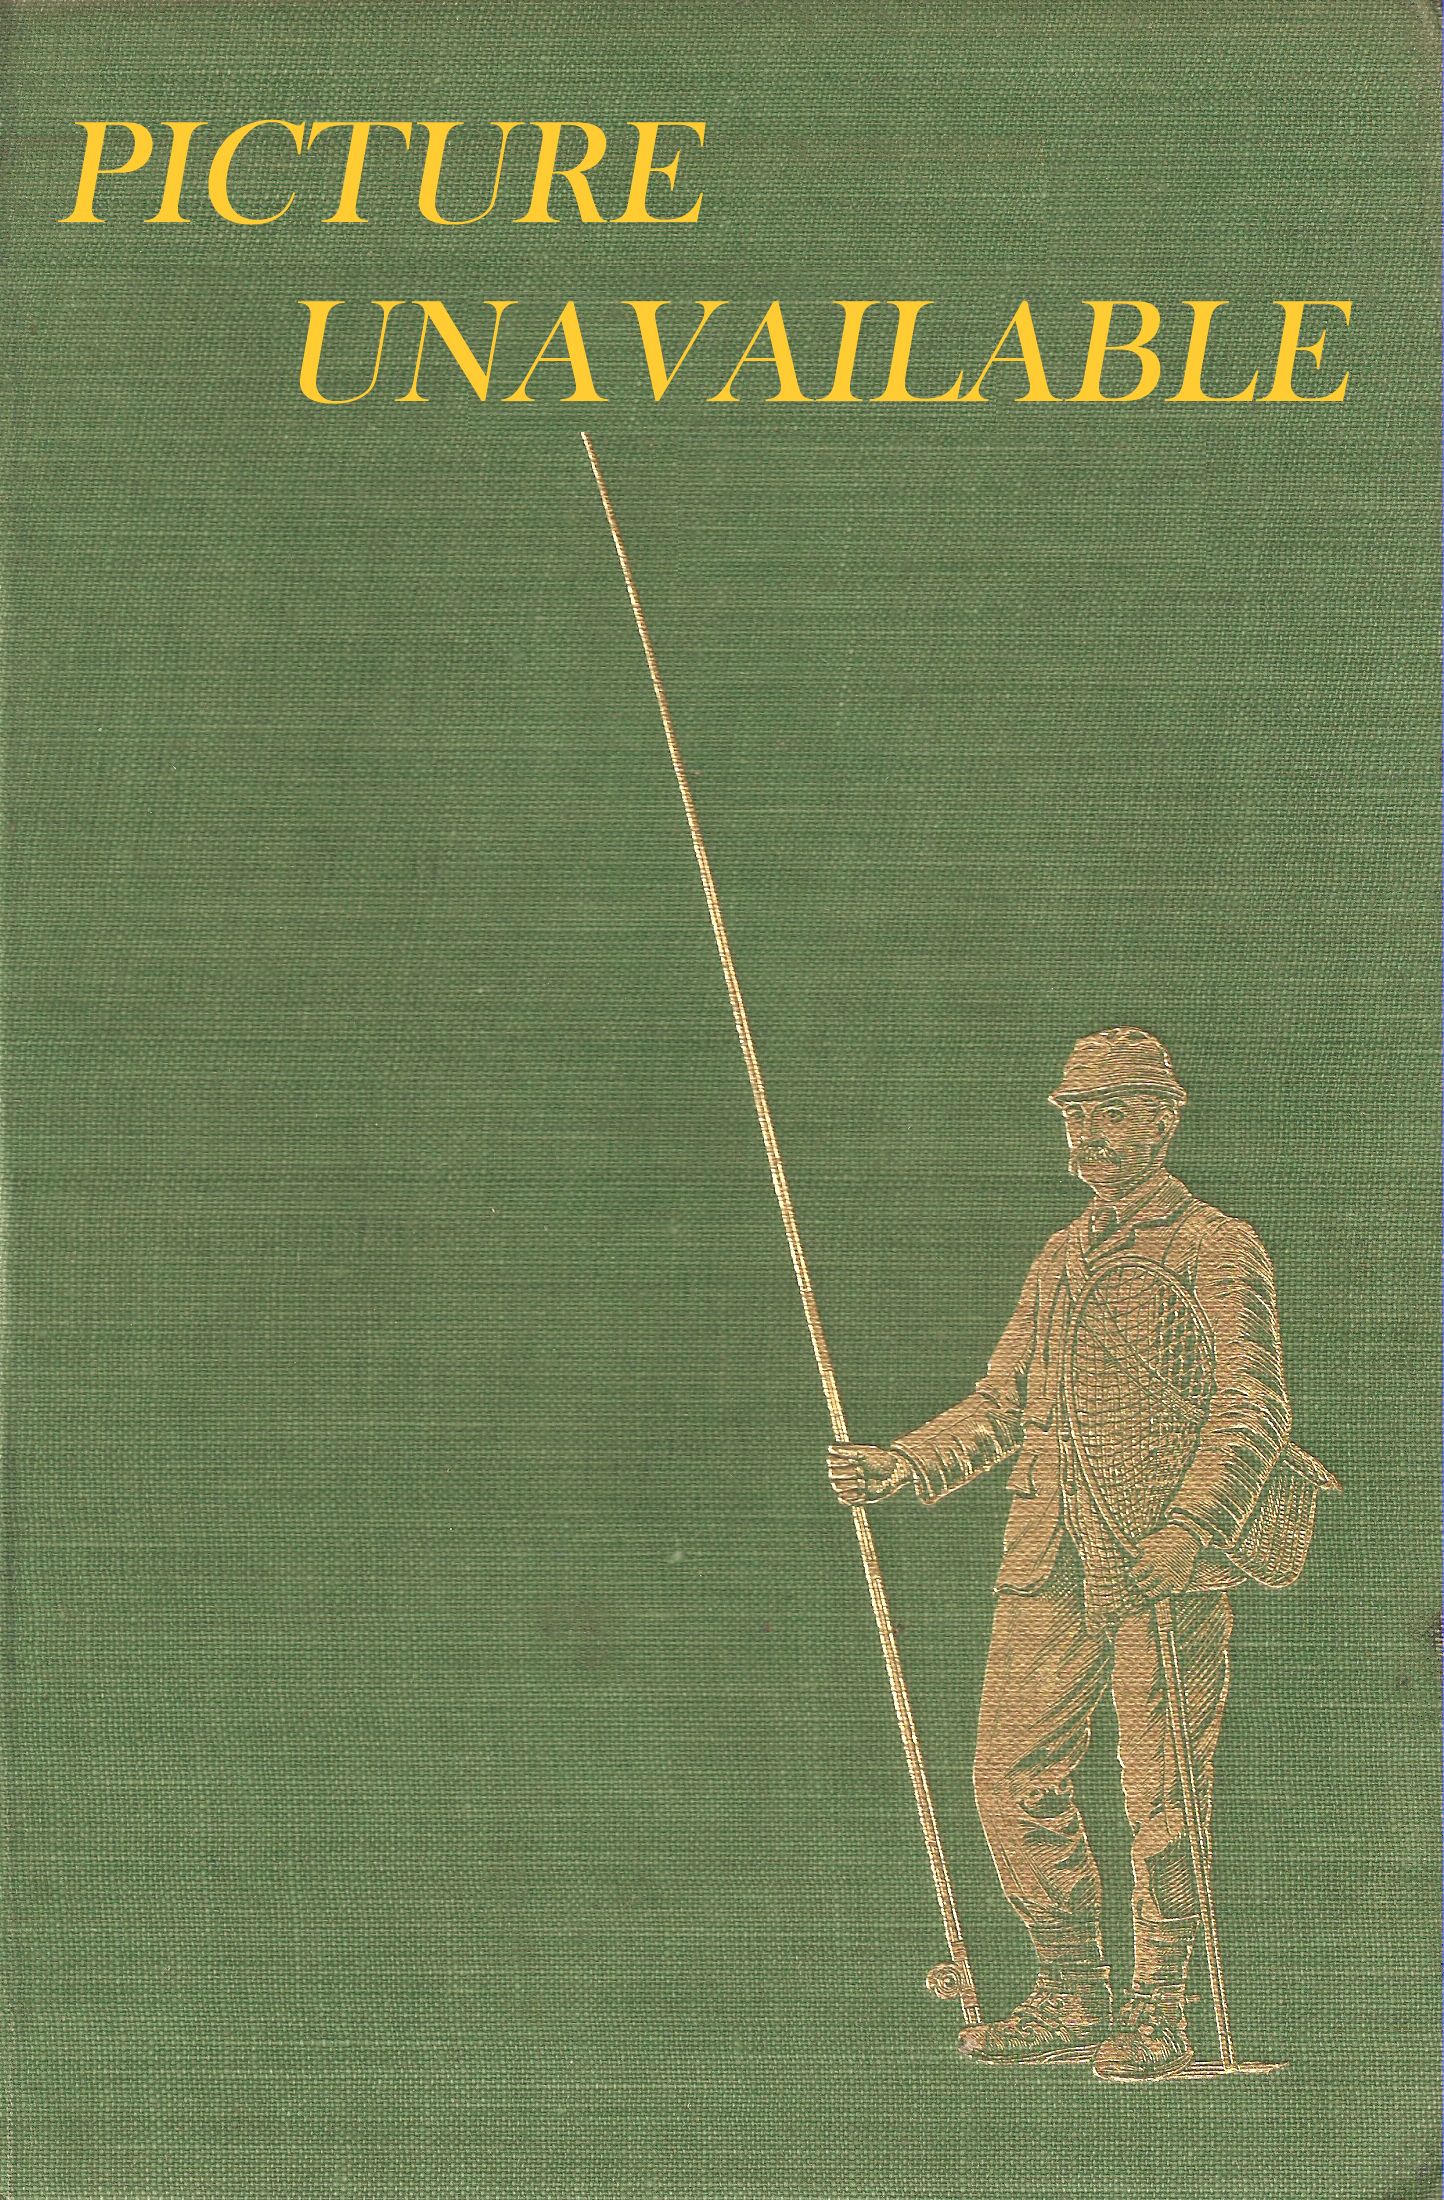 TROUT FROM THE HILLS: THE CONFESSIONS OF AN ADDICTED FLY-FISHERMAN. By Ian Niall. First edition.